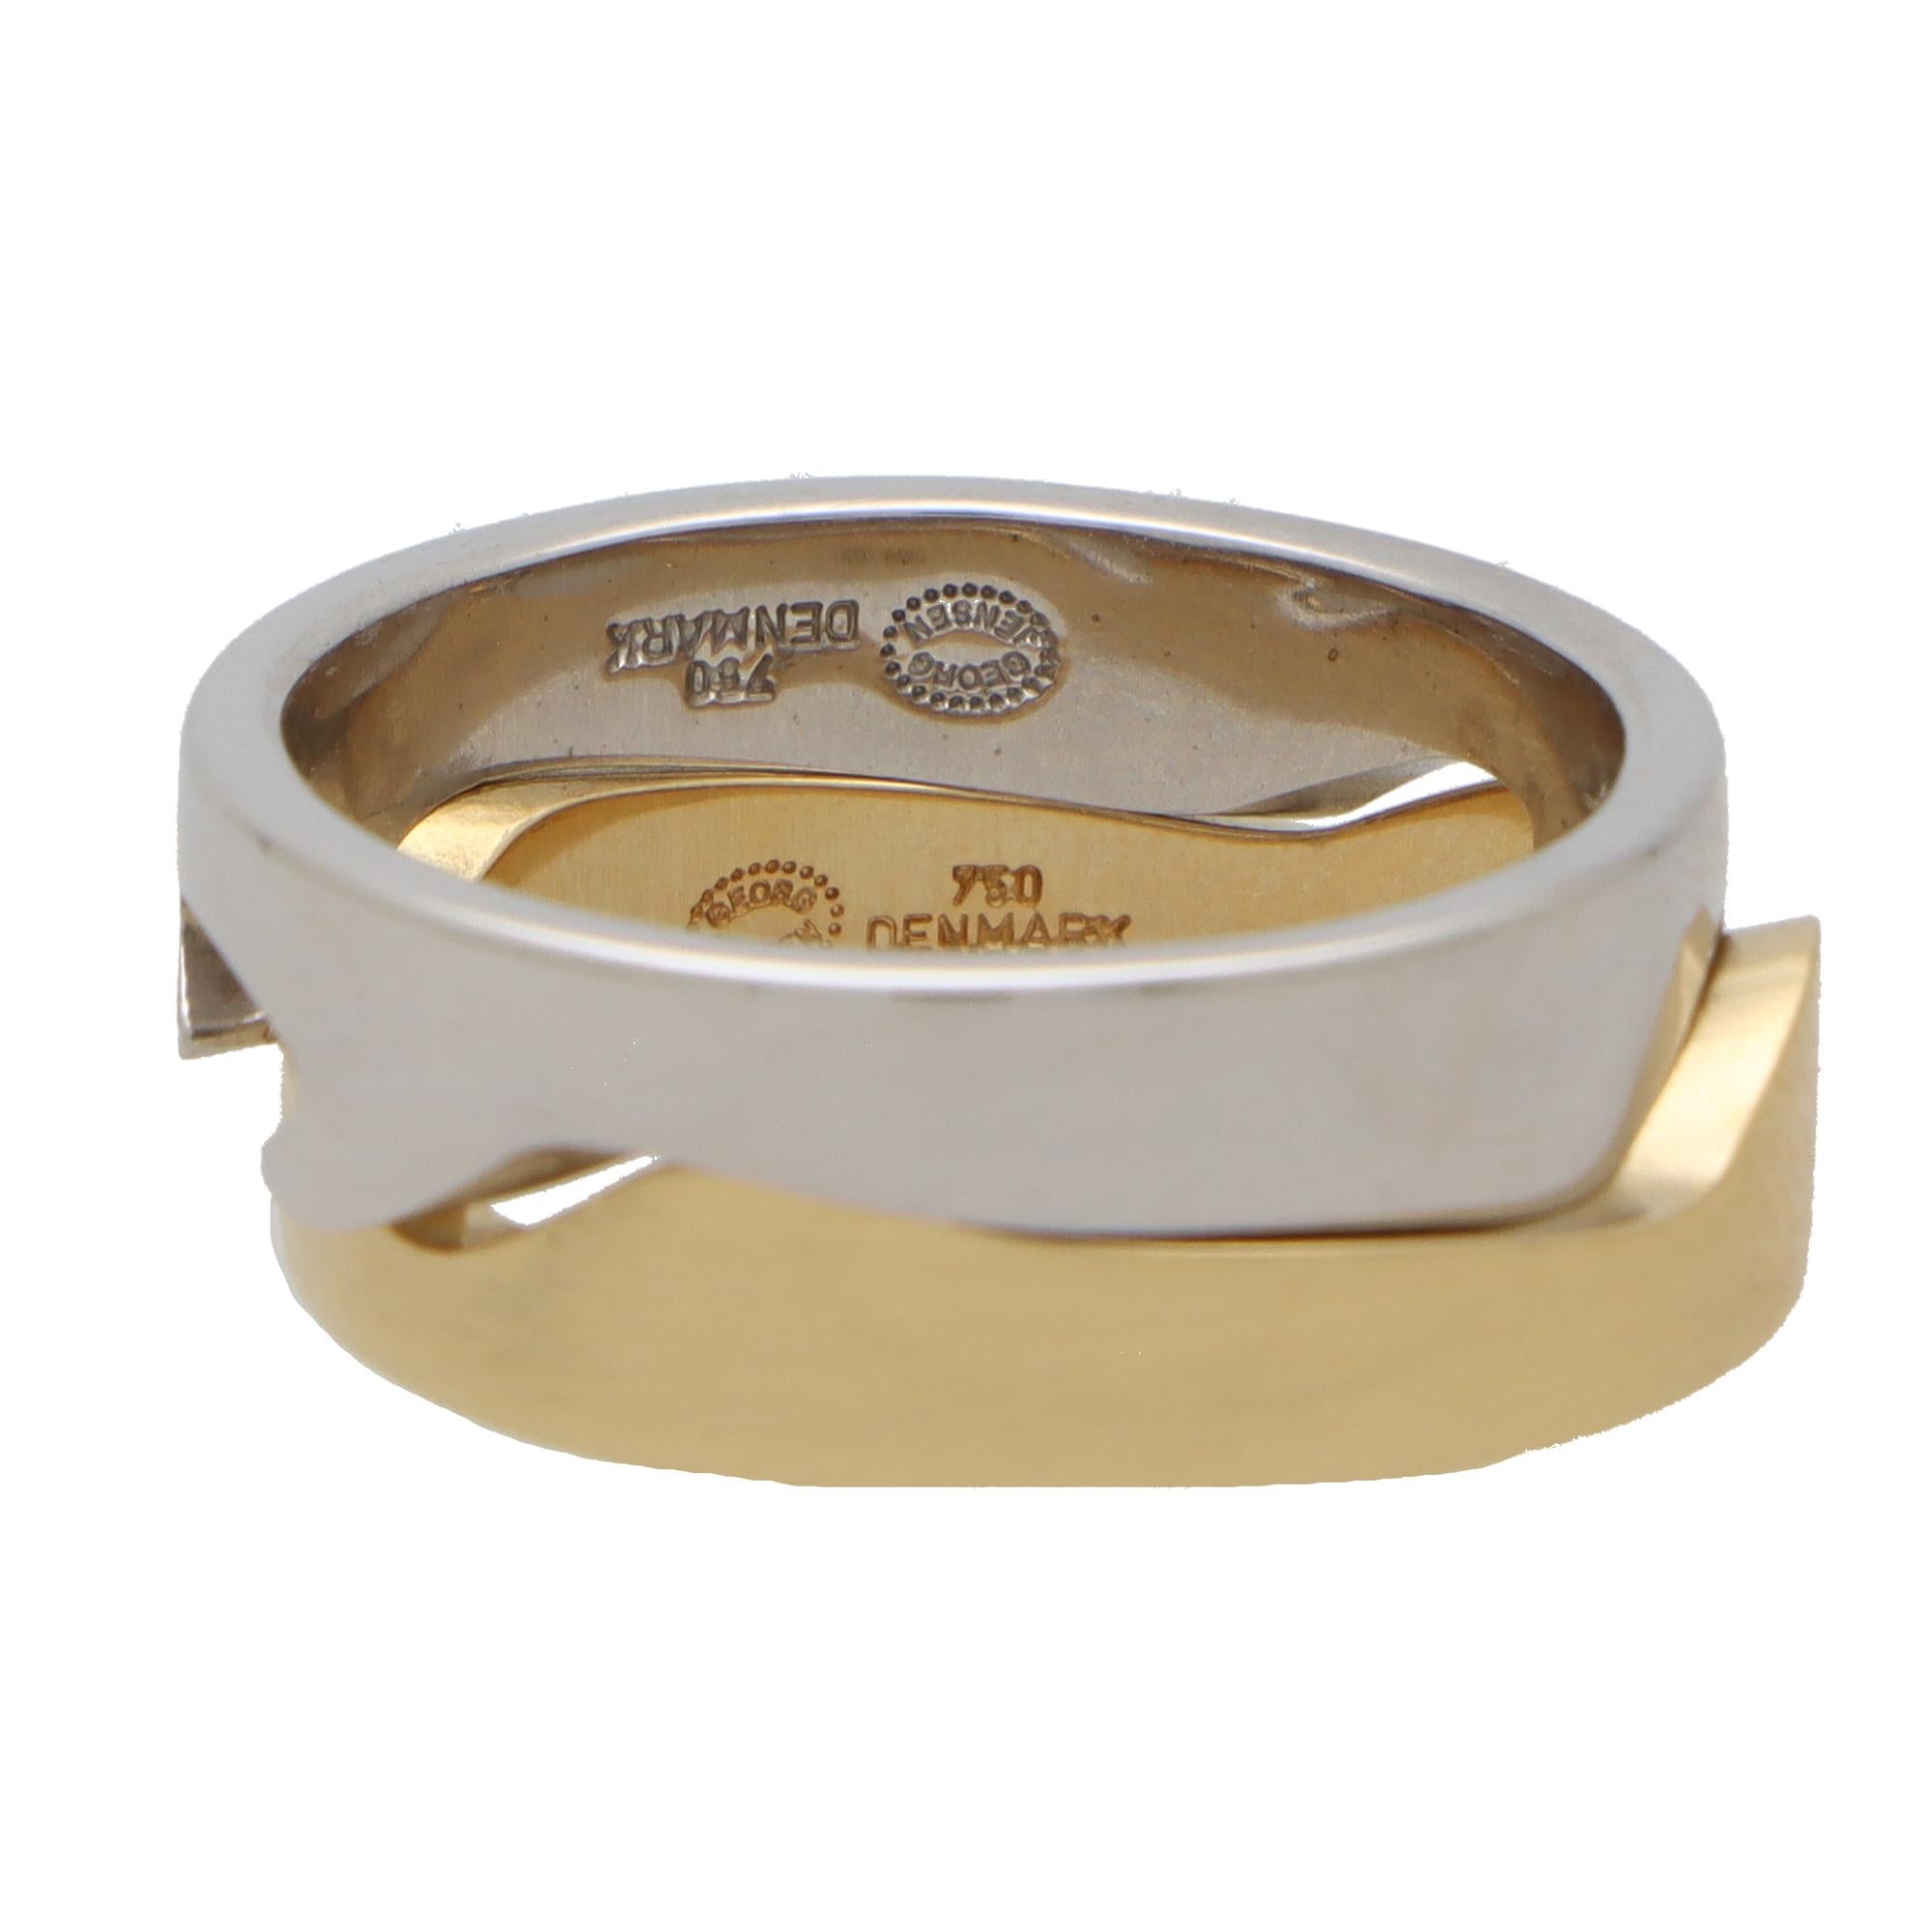  A rather interesting vintage Georg Jensen two piece Fusion puzzle ring set in solid 18k yellow and white gold.

This unique piece is composed of two different coloured gold bands each of which having their own unique grooved pattern. These patterns